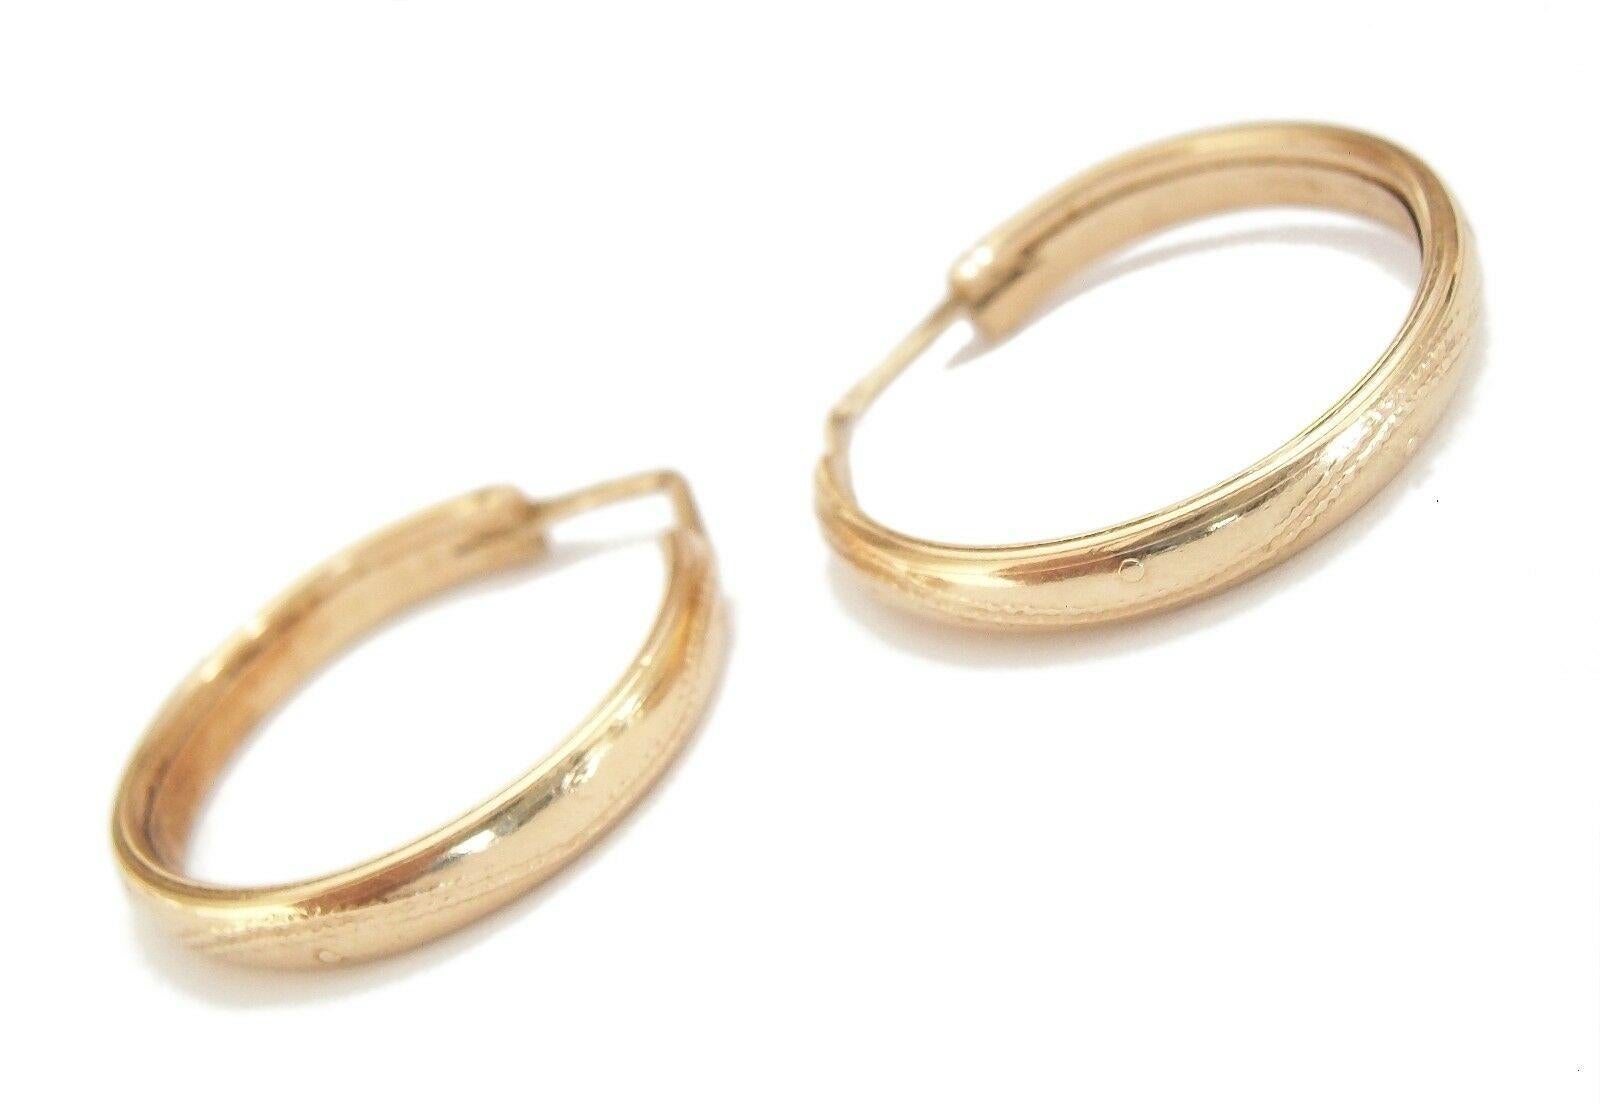 Classical Roman Vintage Vicenza 14K Gold Hoop Earrings, Hand Made, Italy, Mid 20th Century For Sale